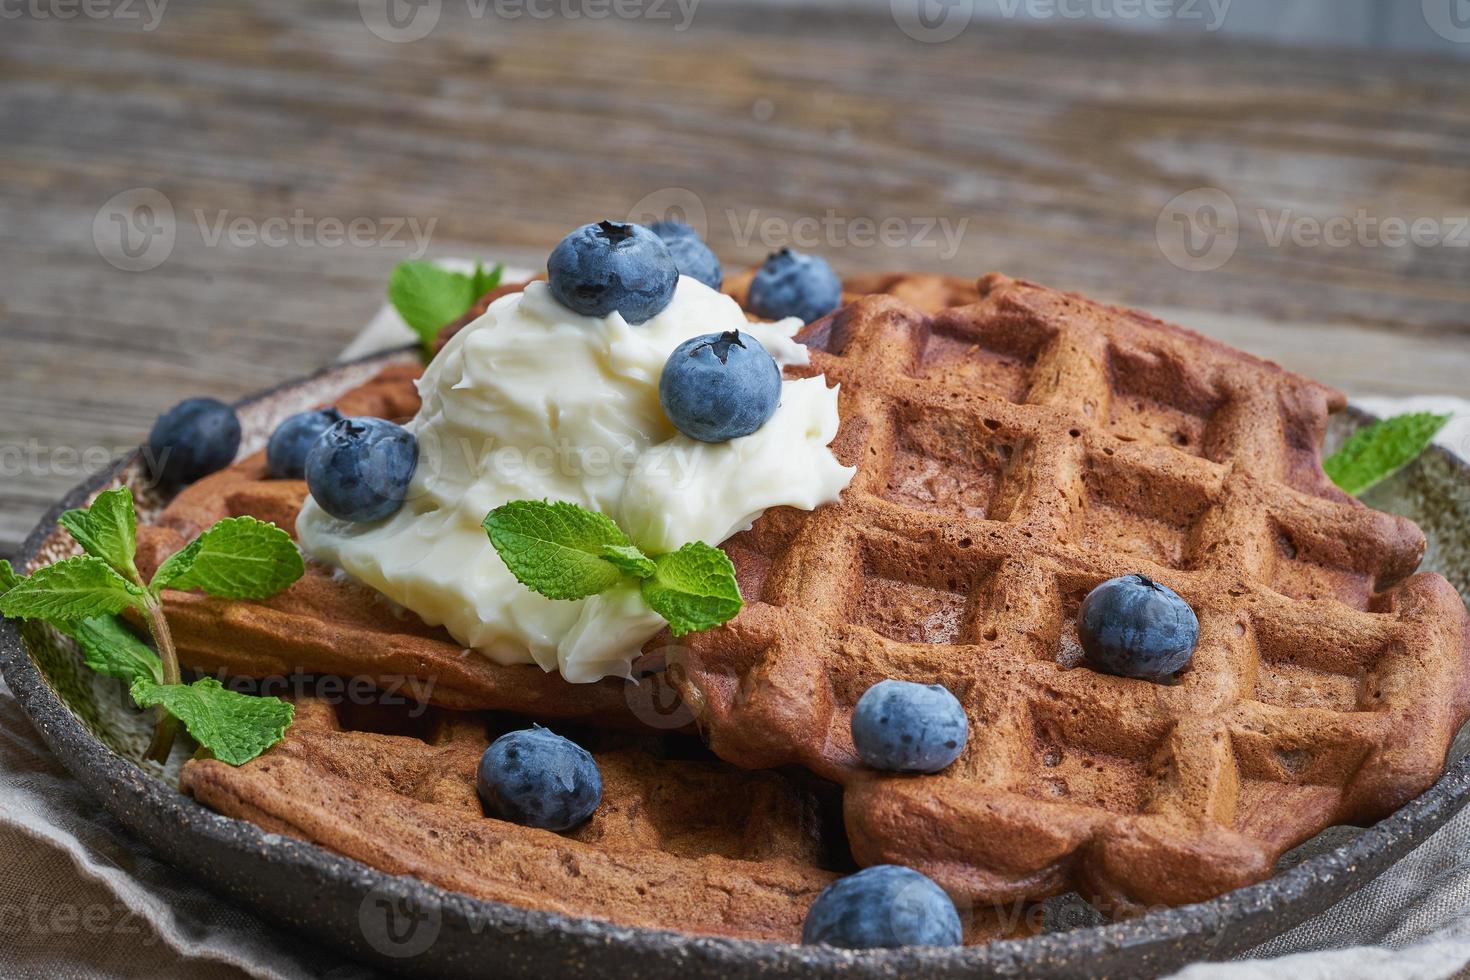 Chocolate banana waffles with blueberries, on dark wooden old table. Side view, close up photo